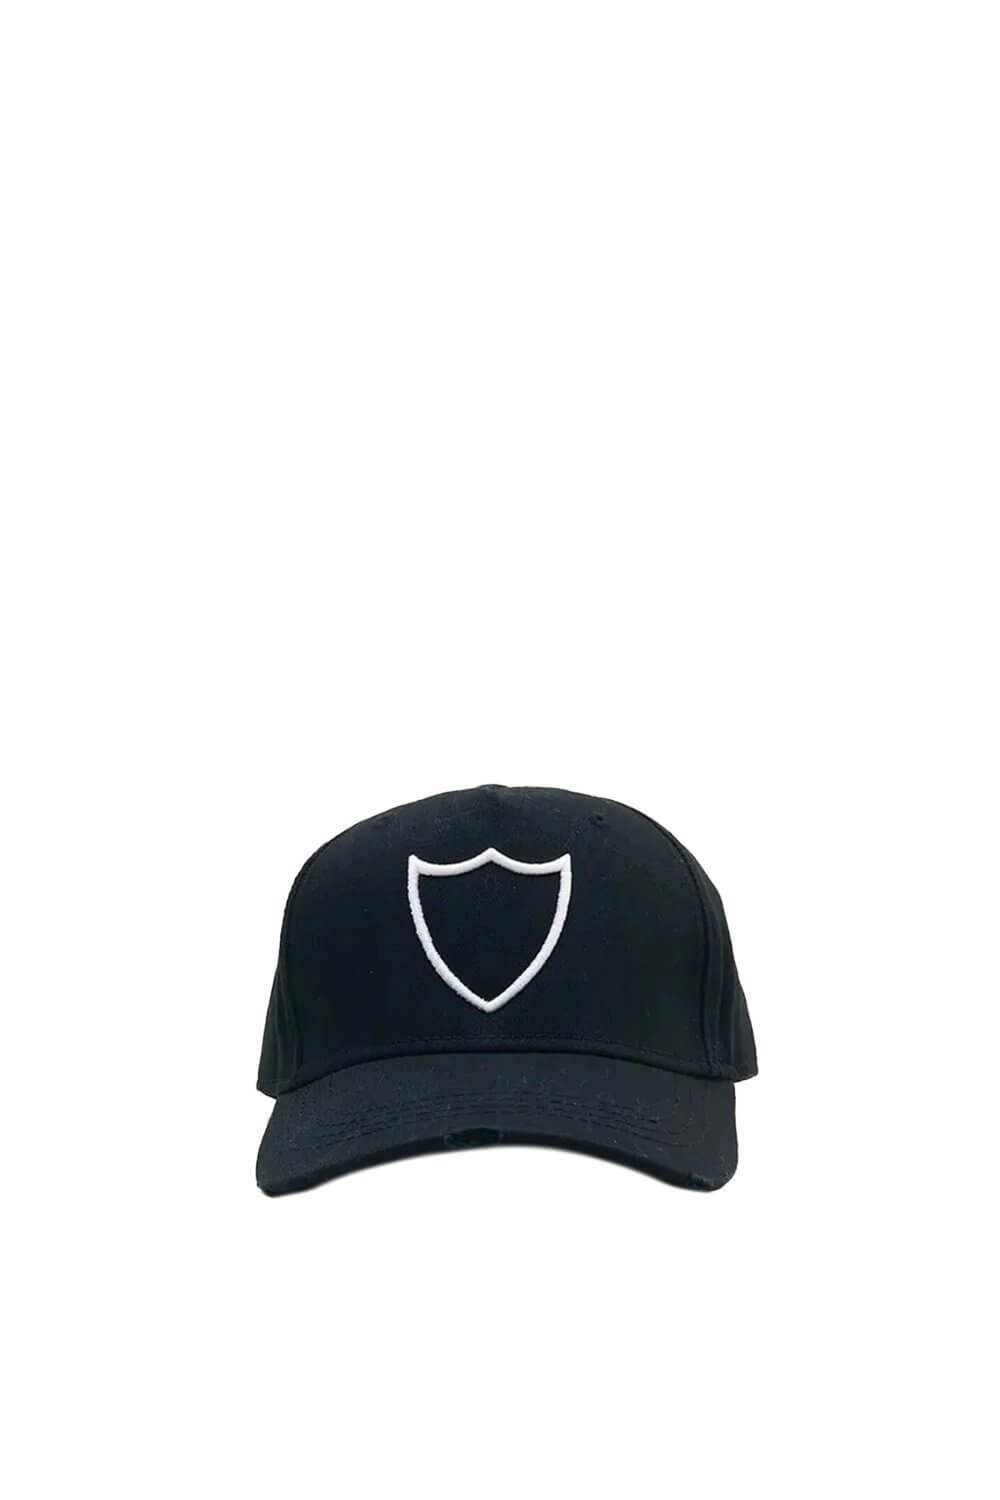 HTC LOGO BASEBALL CAP Black baseball cap with preformed peak, round crown with eyelets, HTC Los Angeles shield logo embroidered on the front, adjustable strap on the back. One size fits all. 100% cotton. HTC LOS ANGELES